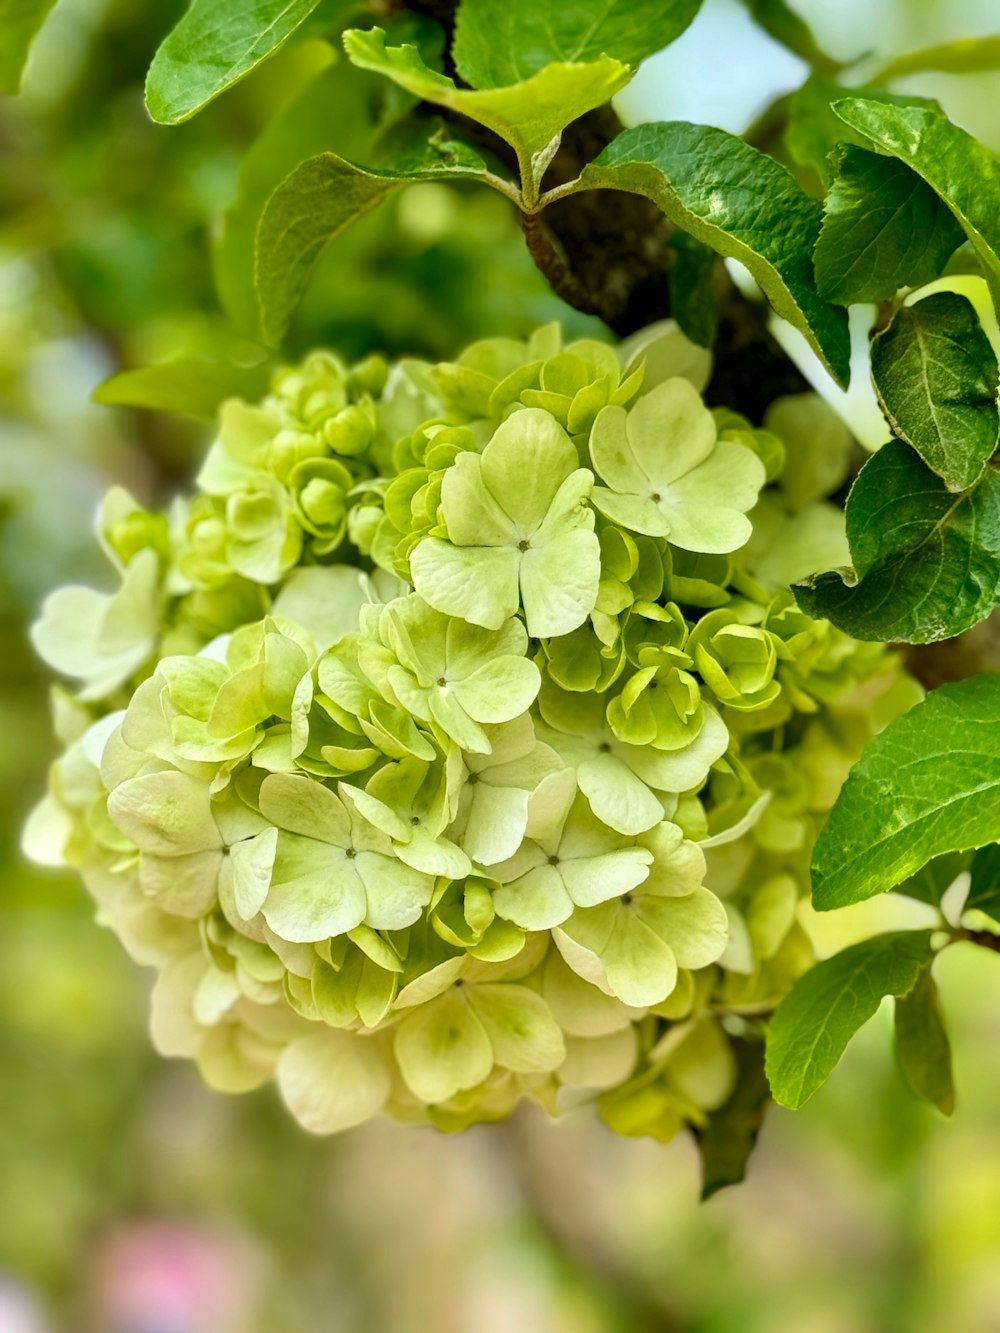 a cluster of green and white flowers growing on a tree